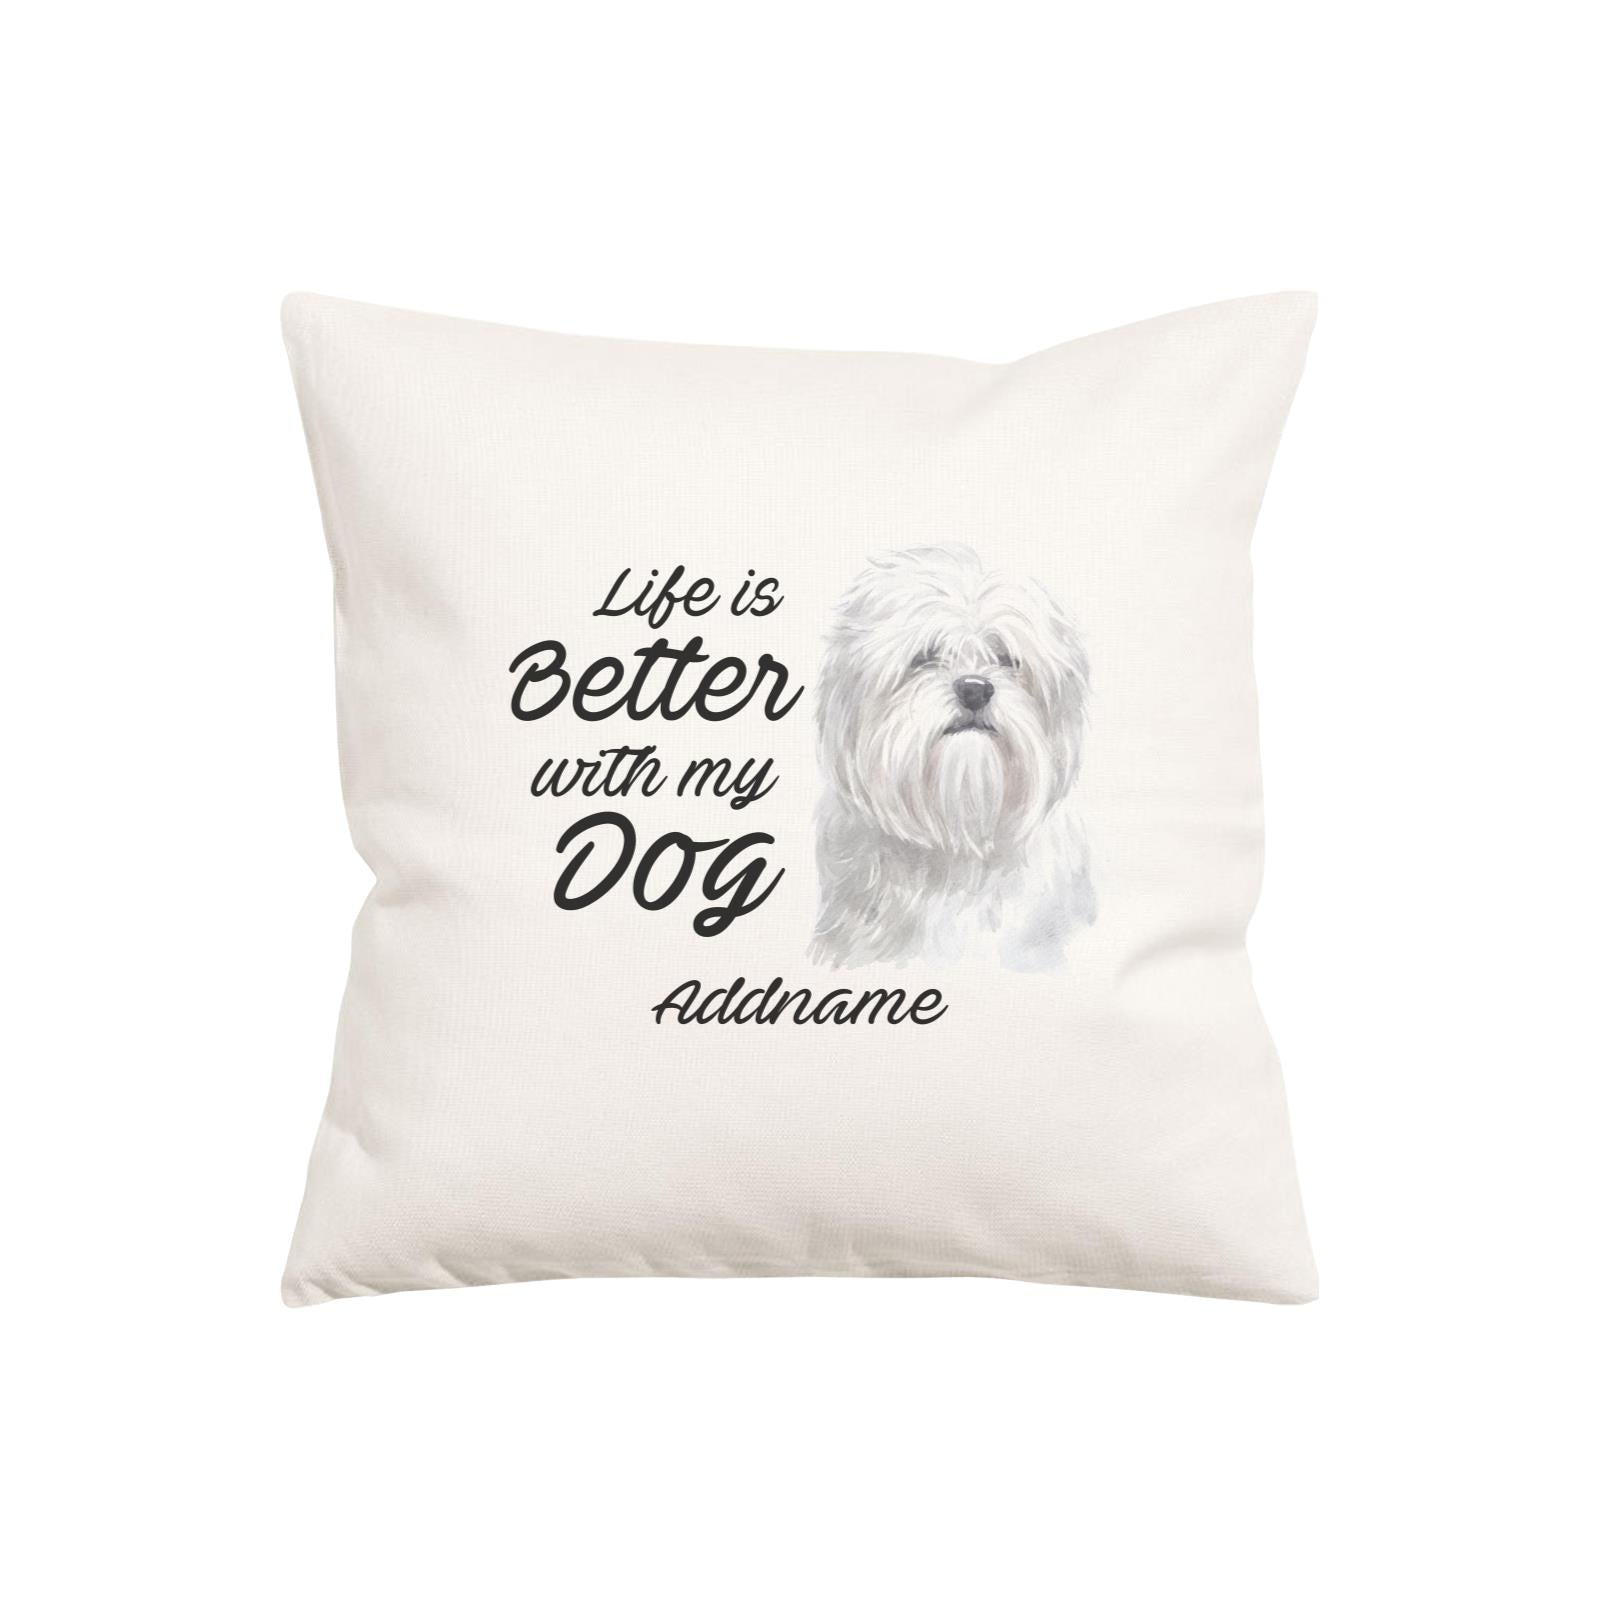 Watercolor Life is Better With My Dog Lhasa Apso Addname Pillow Cushion